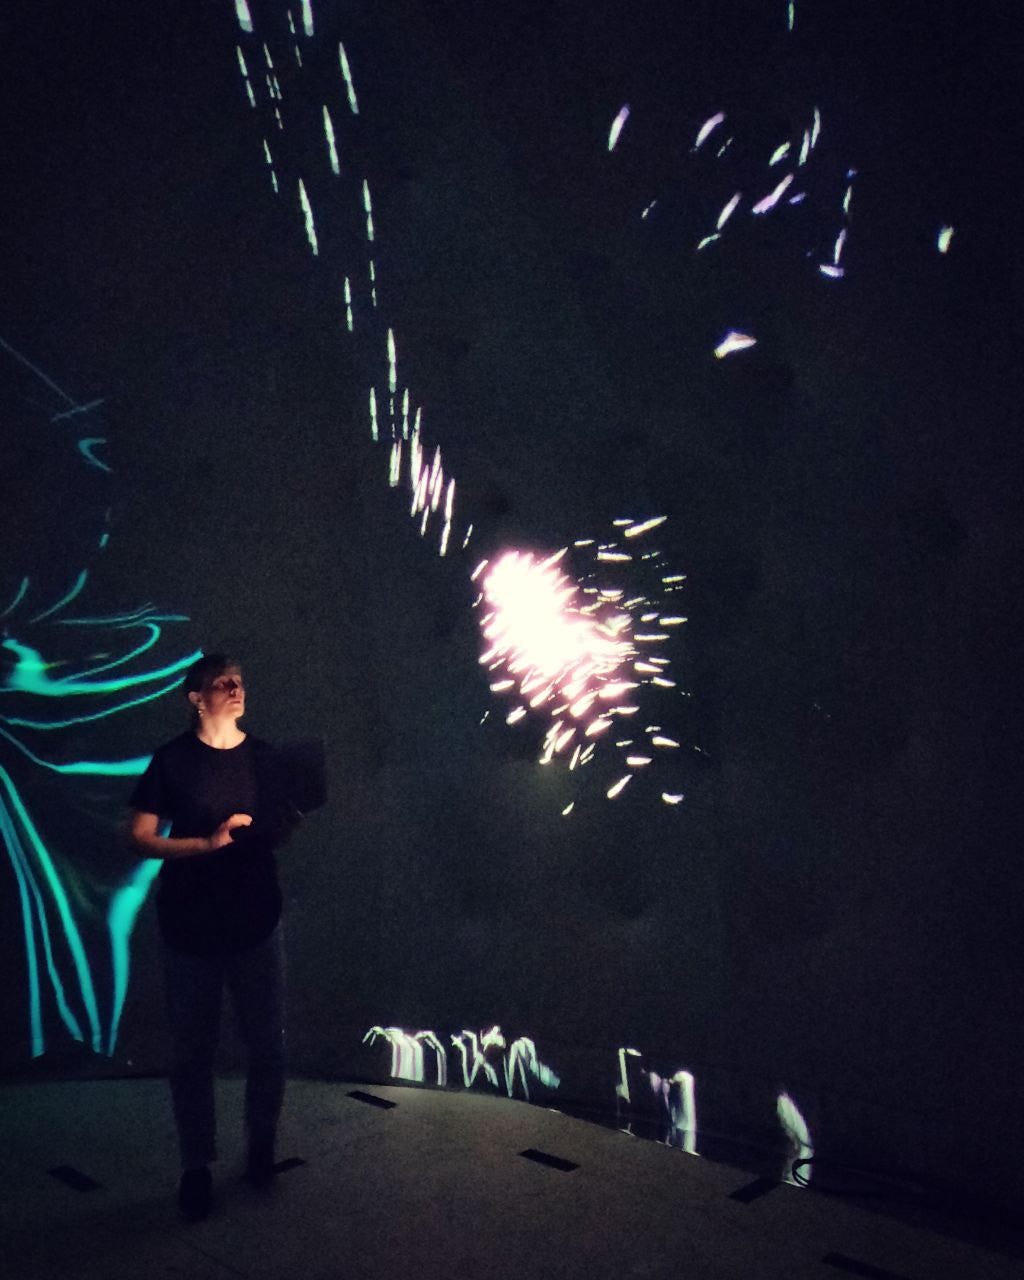 Woman in black standing in the Laila dome with projections in the background